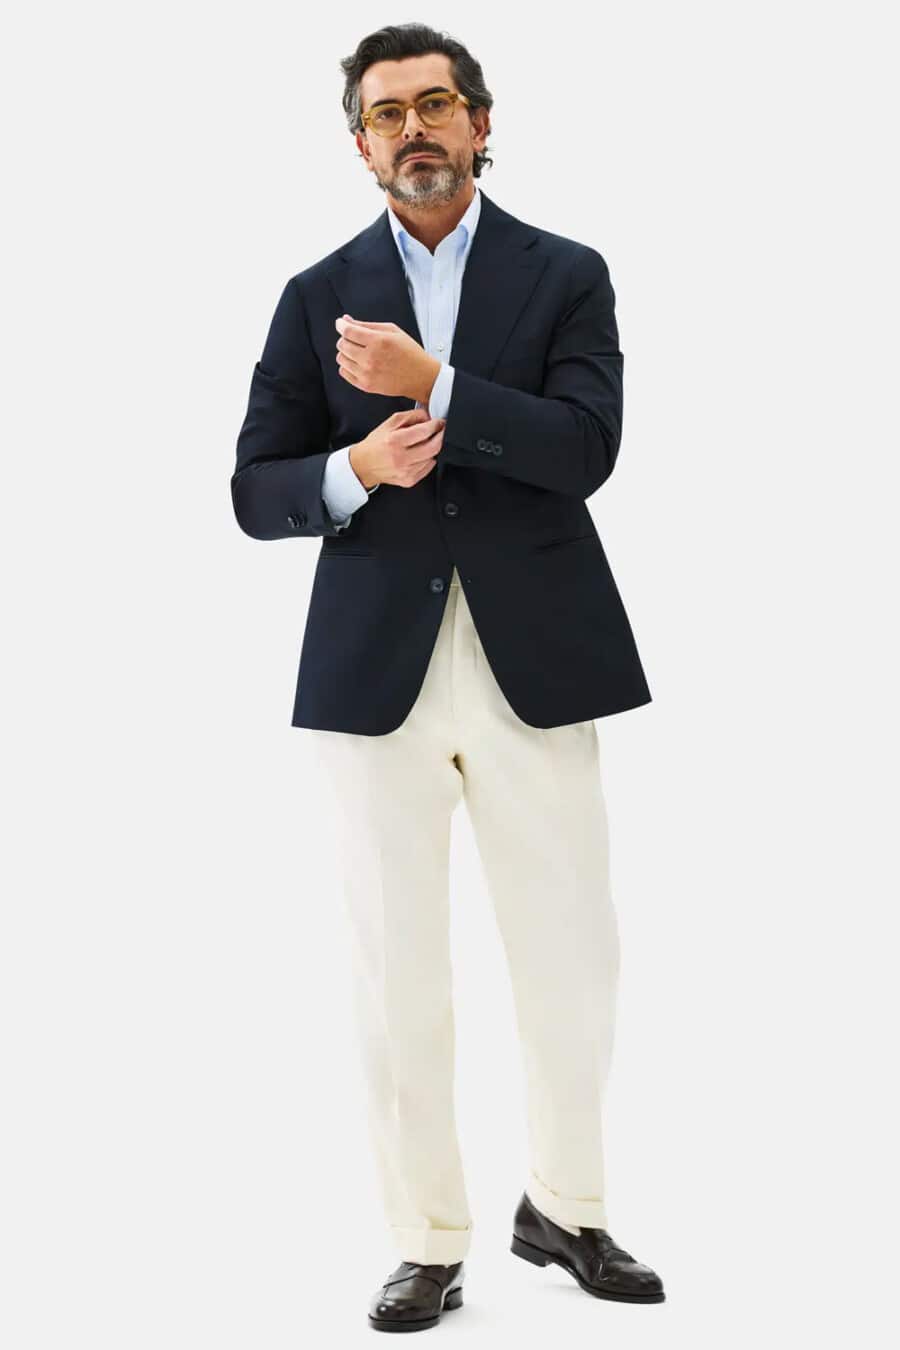 Men's navy blazer, sky blue shirt, off-white turn-up pants and brown leather penny loafers outfit